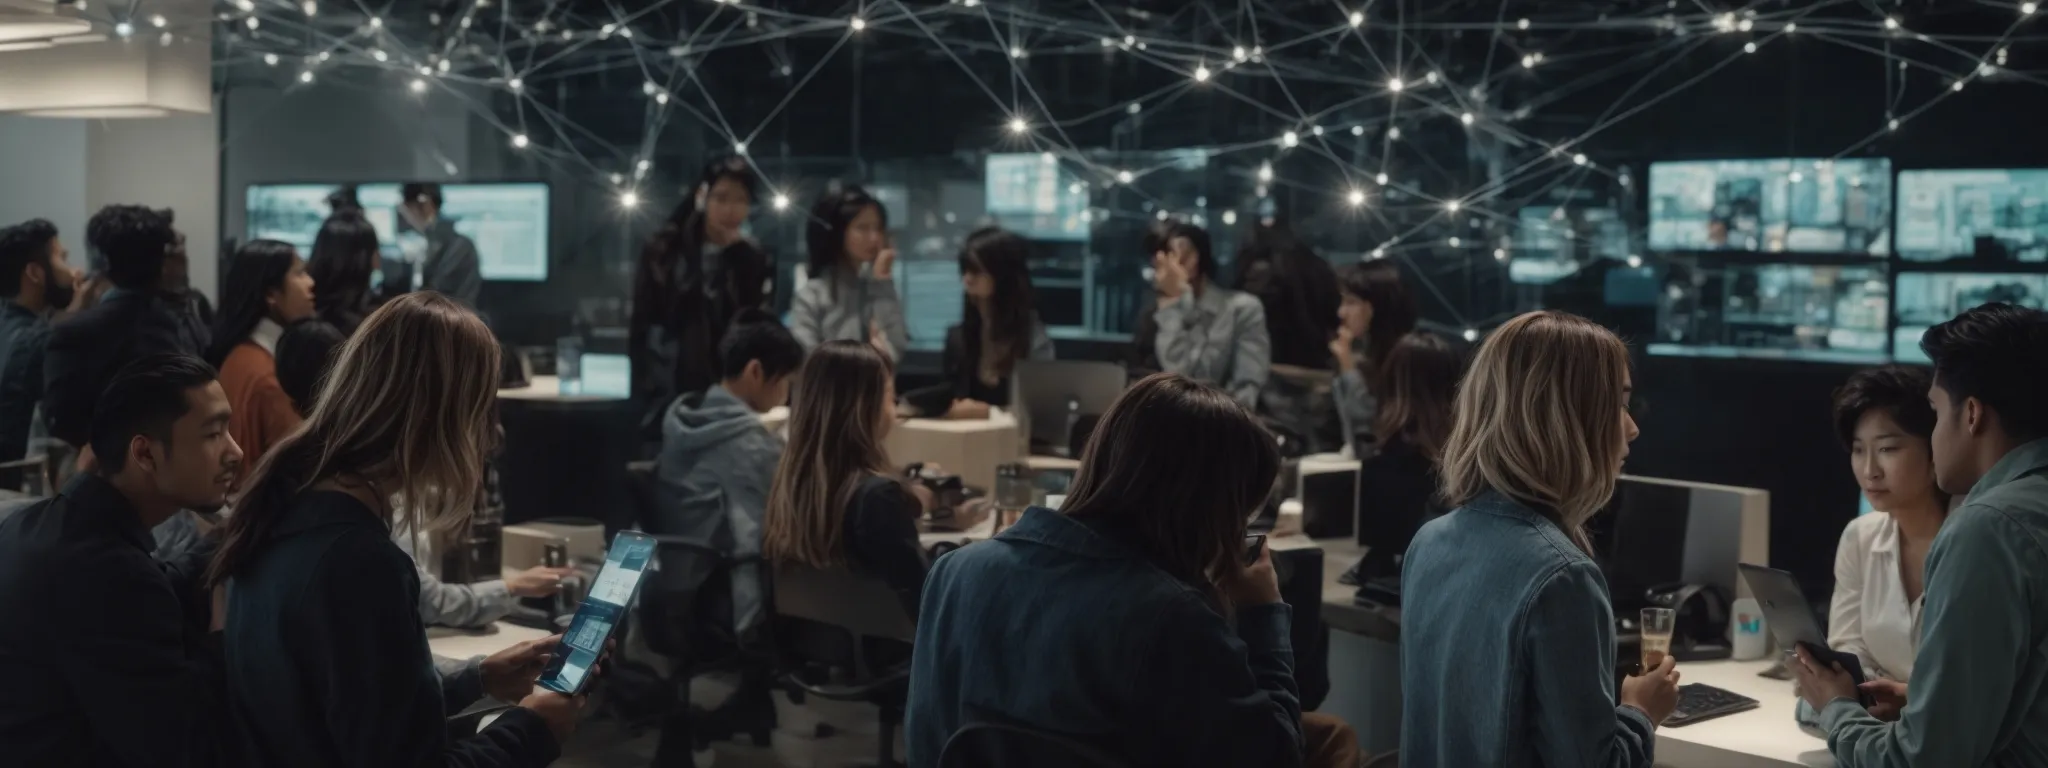 a group of diverse people engaging with social media on various devices, overlooking an expansive network of interconnected digital nodes.